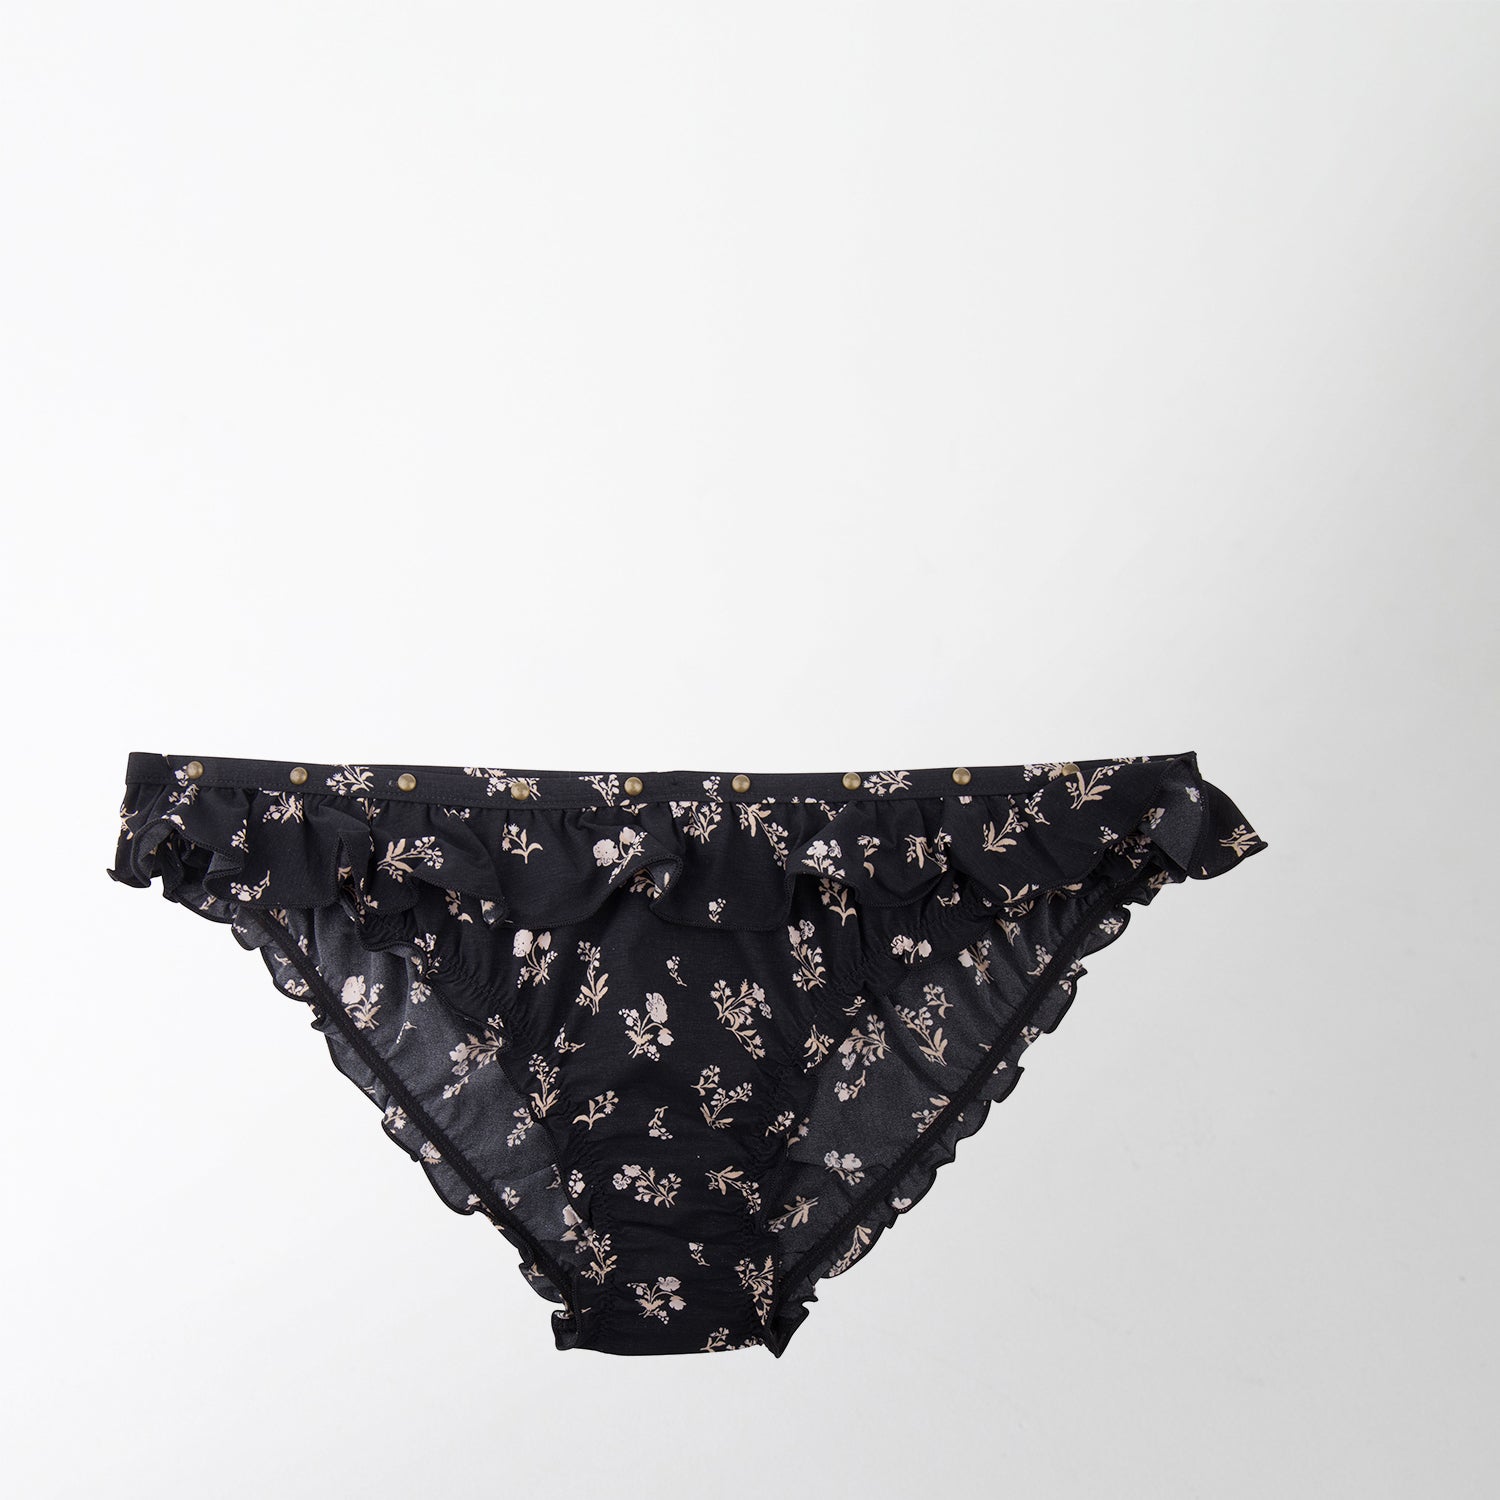 black floral ivy brief by Love Stories Intimates at Secret Location Concept Store